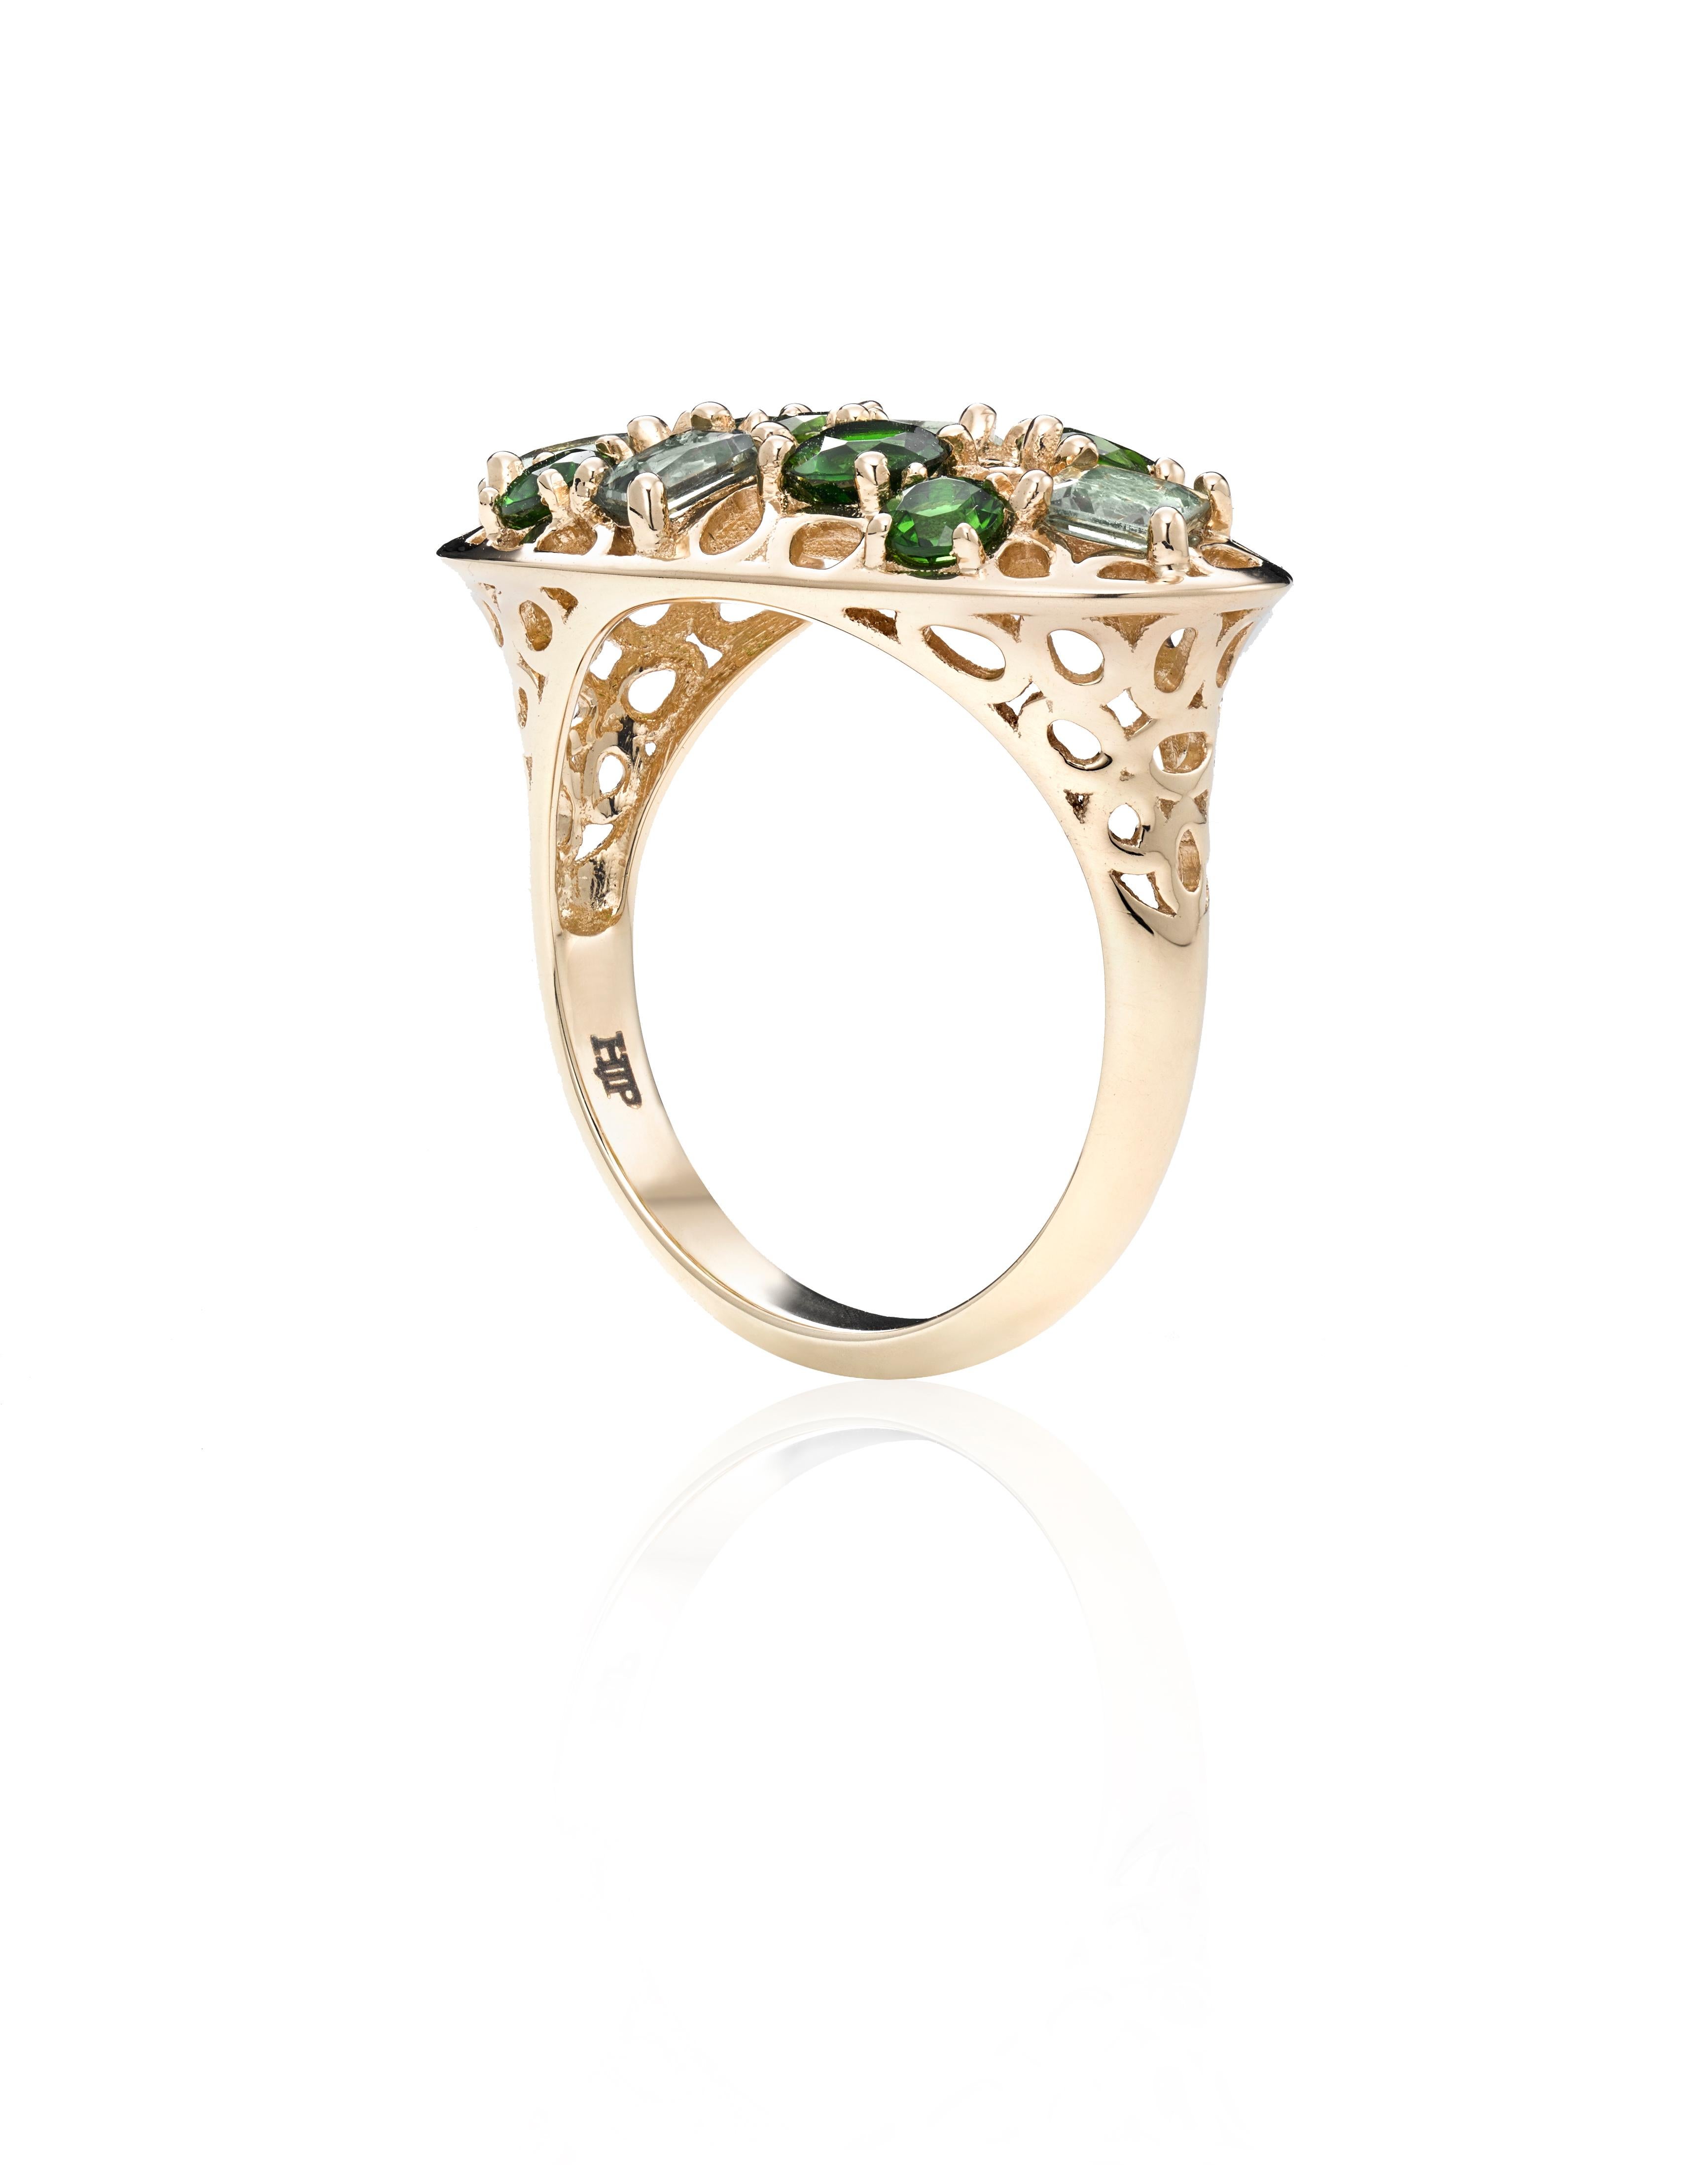 Prong set Green Sapphires and Chrome Diopside stones scattered within Hi June Parker's signature intricate open work of organic circular motifs are captured in this Statement ring created to be worn with a cocktail dress, strong suit or your